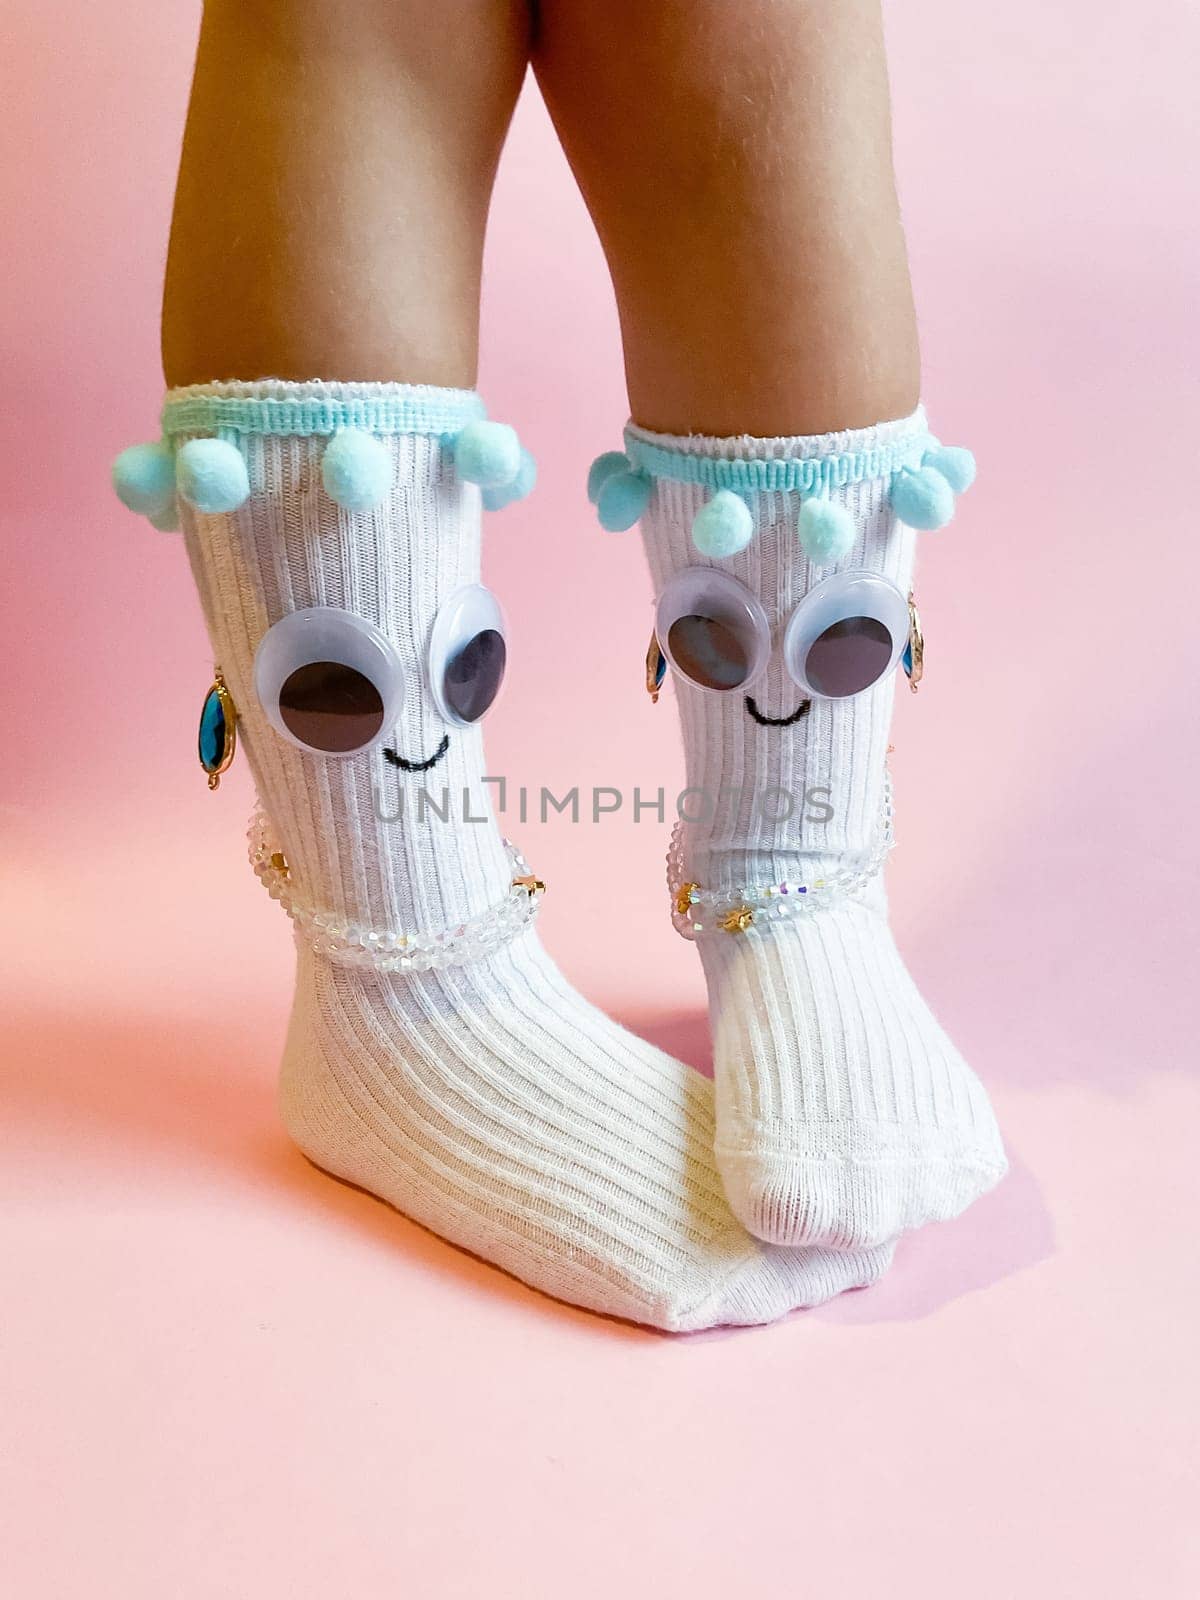 Baby socks with eyes and a smile on a pink background. Cute funny socks with eyes and decorations on the feet of a child.